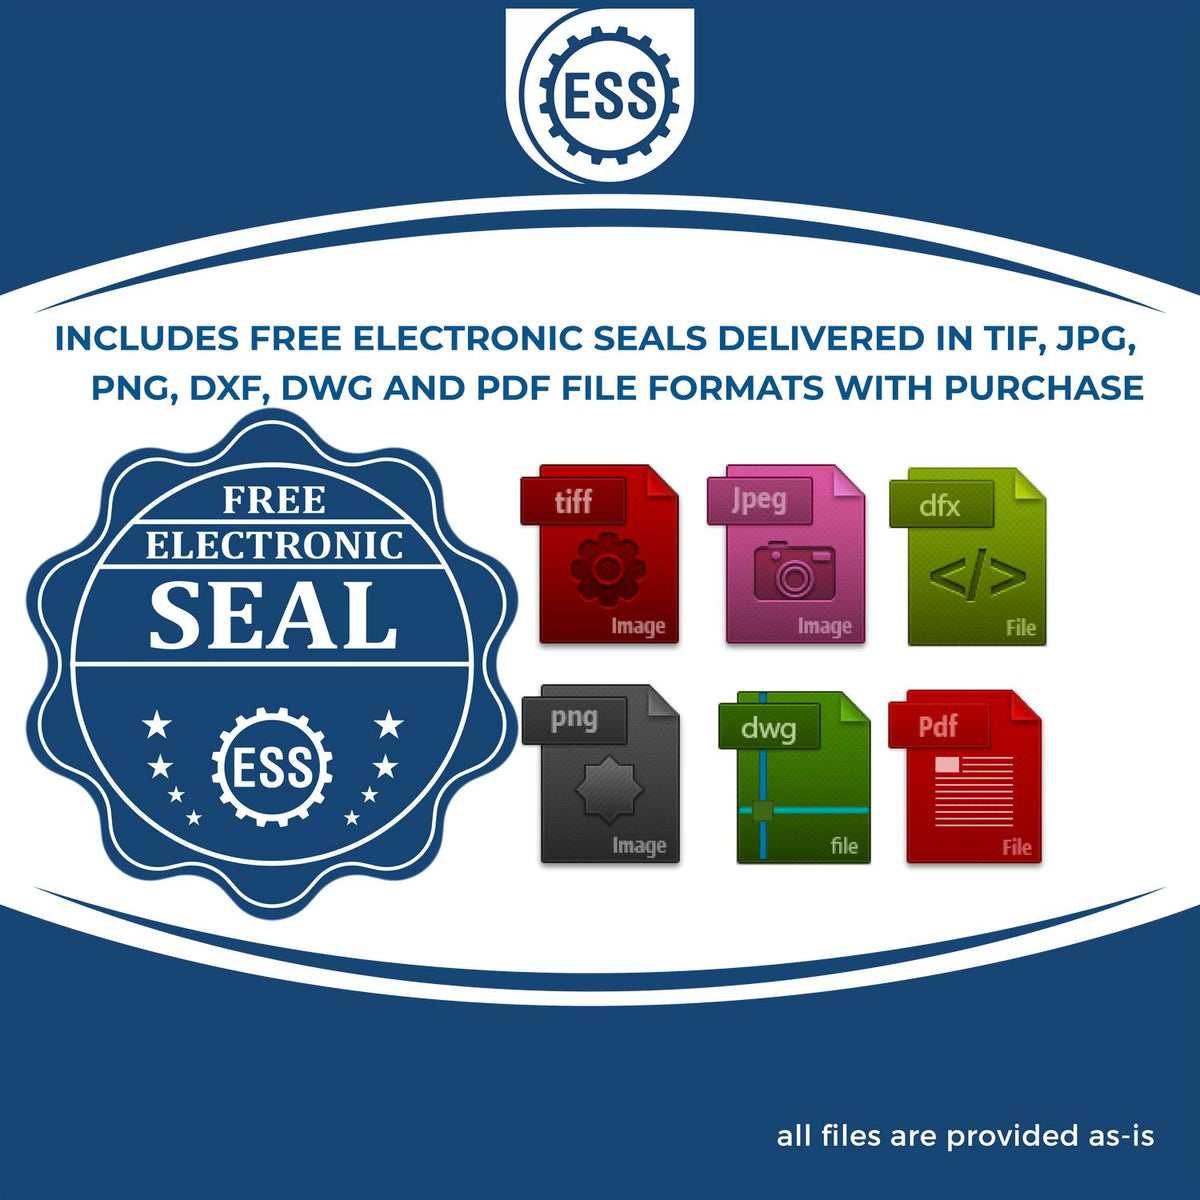 An infographic for the free electronic seal for the Hawaii Desk Architect Embossing Seal illustrating the different file type icons such as DXF, DWG, TIF, JPG and PNG.